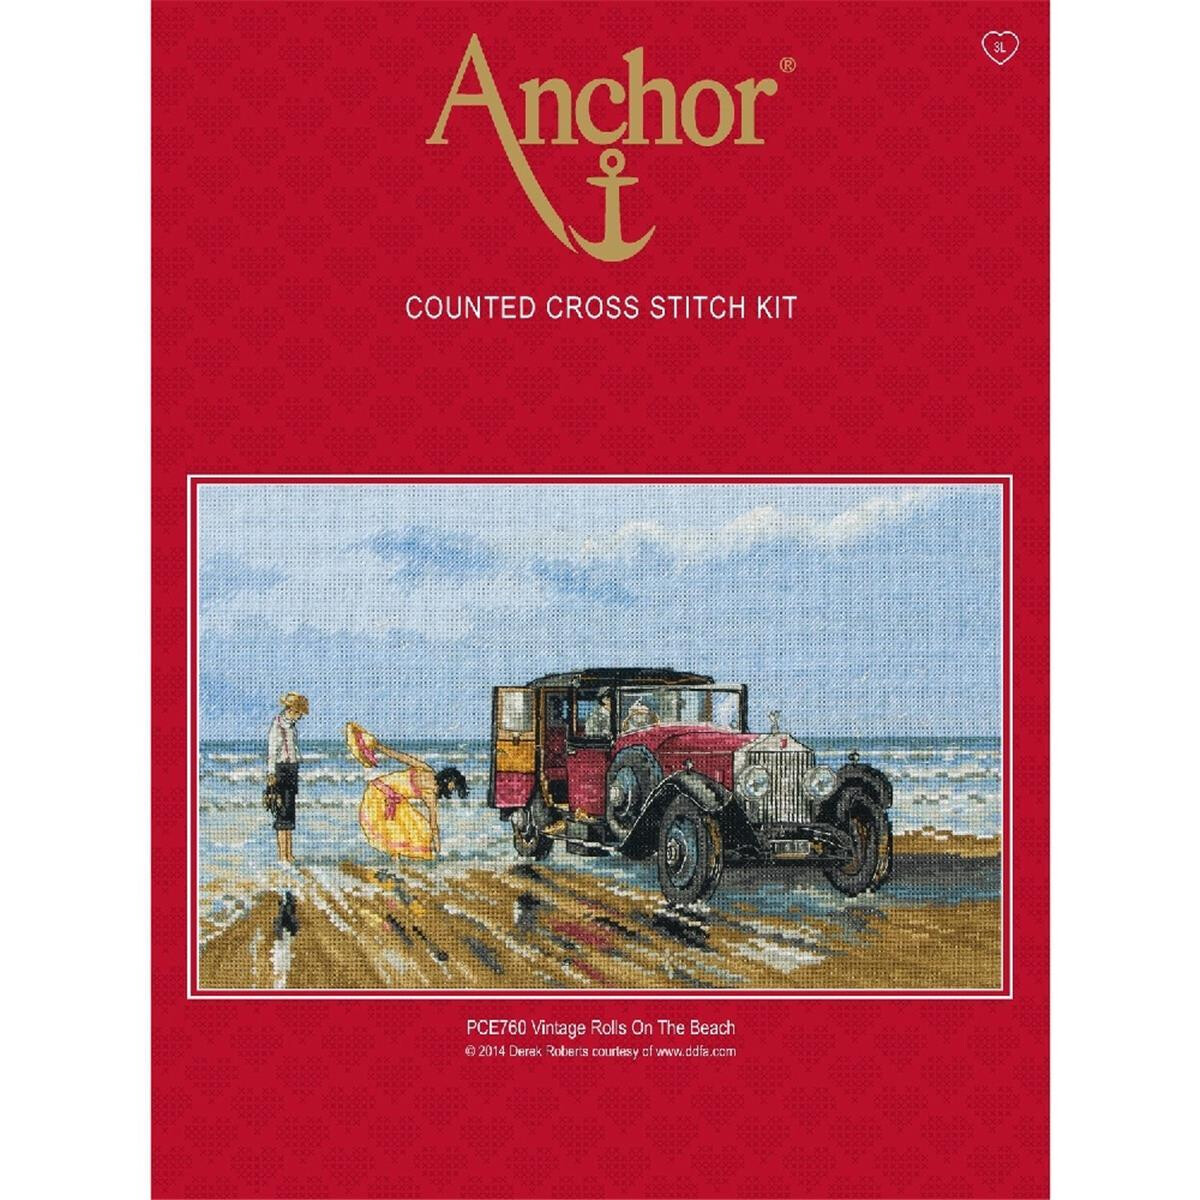 Anchor counted Cross Stitch kit "Vintage Rolls on...